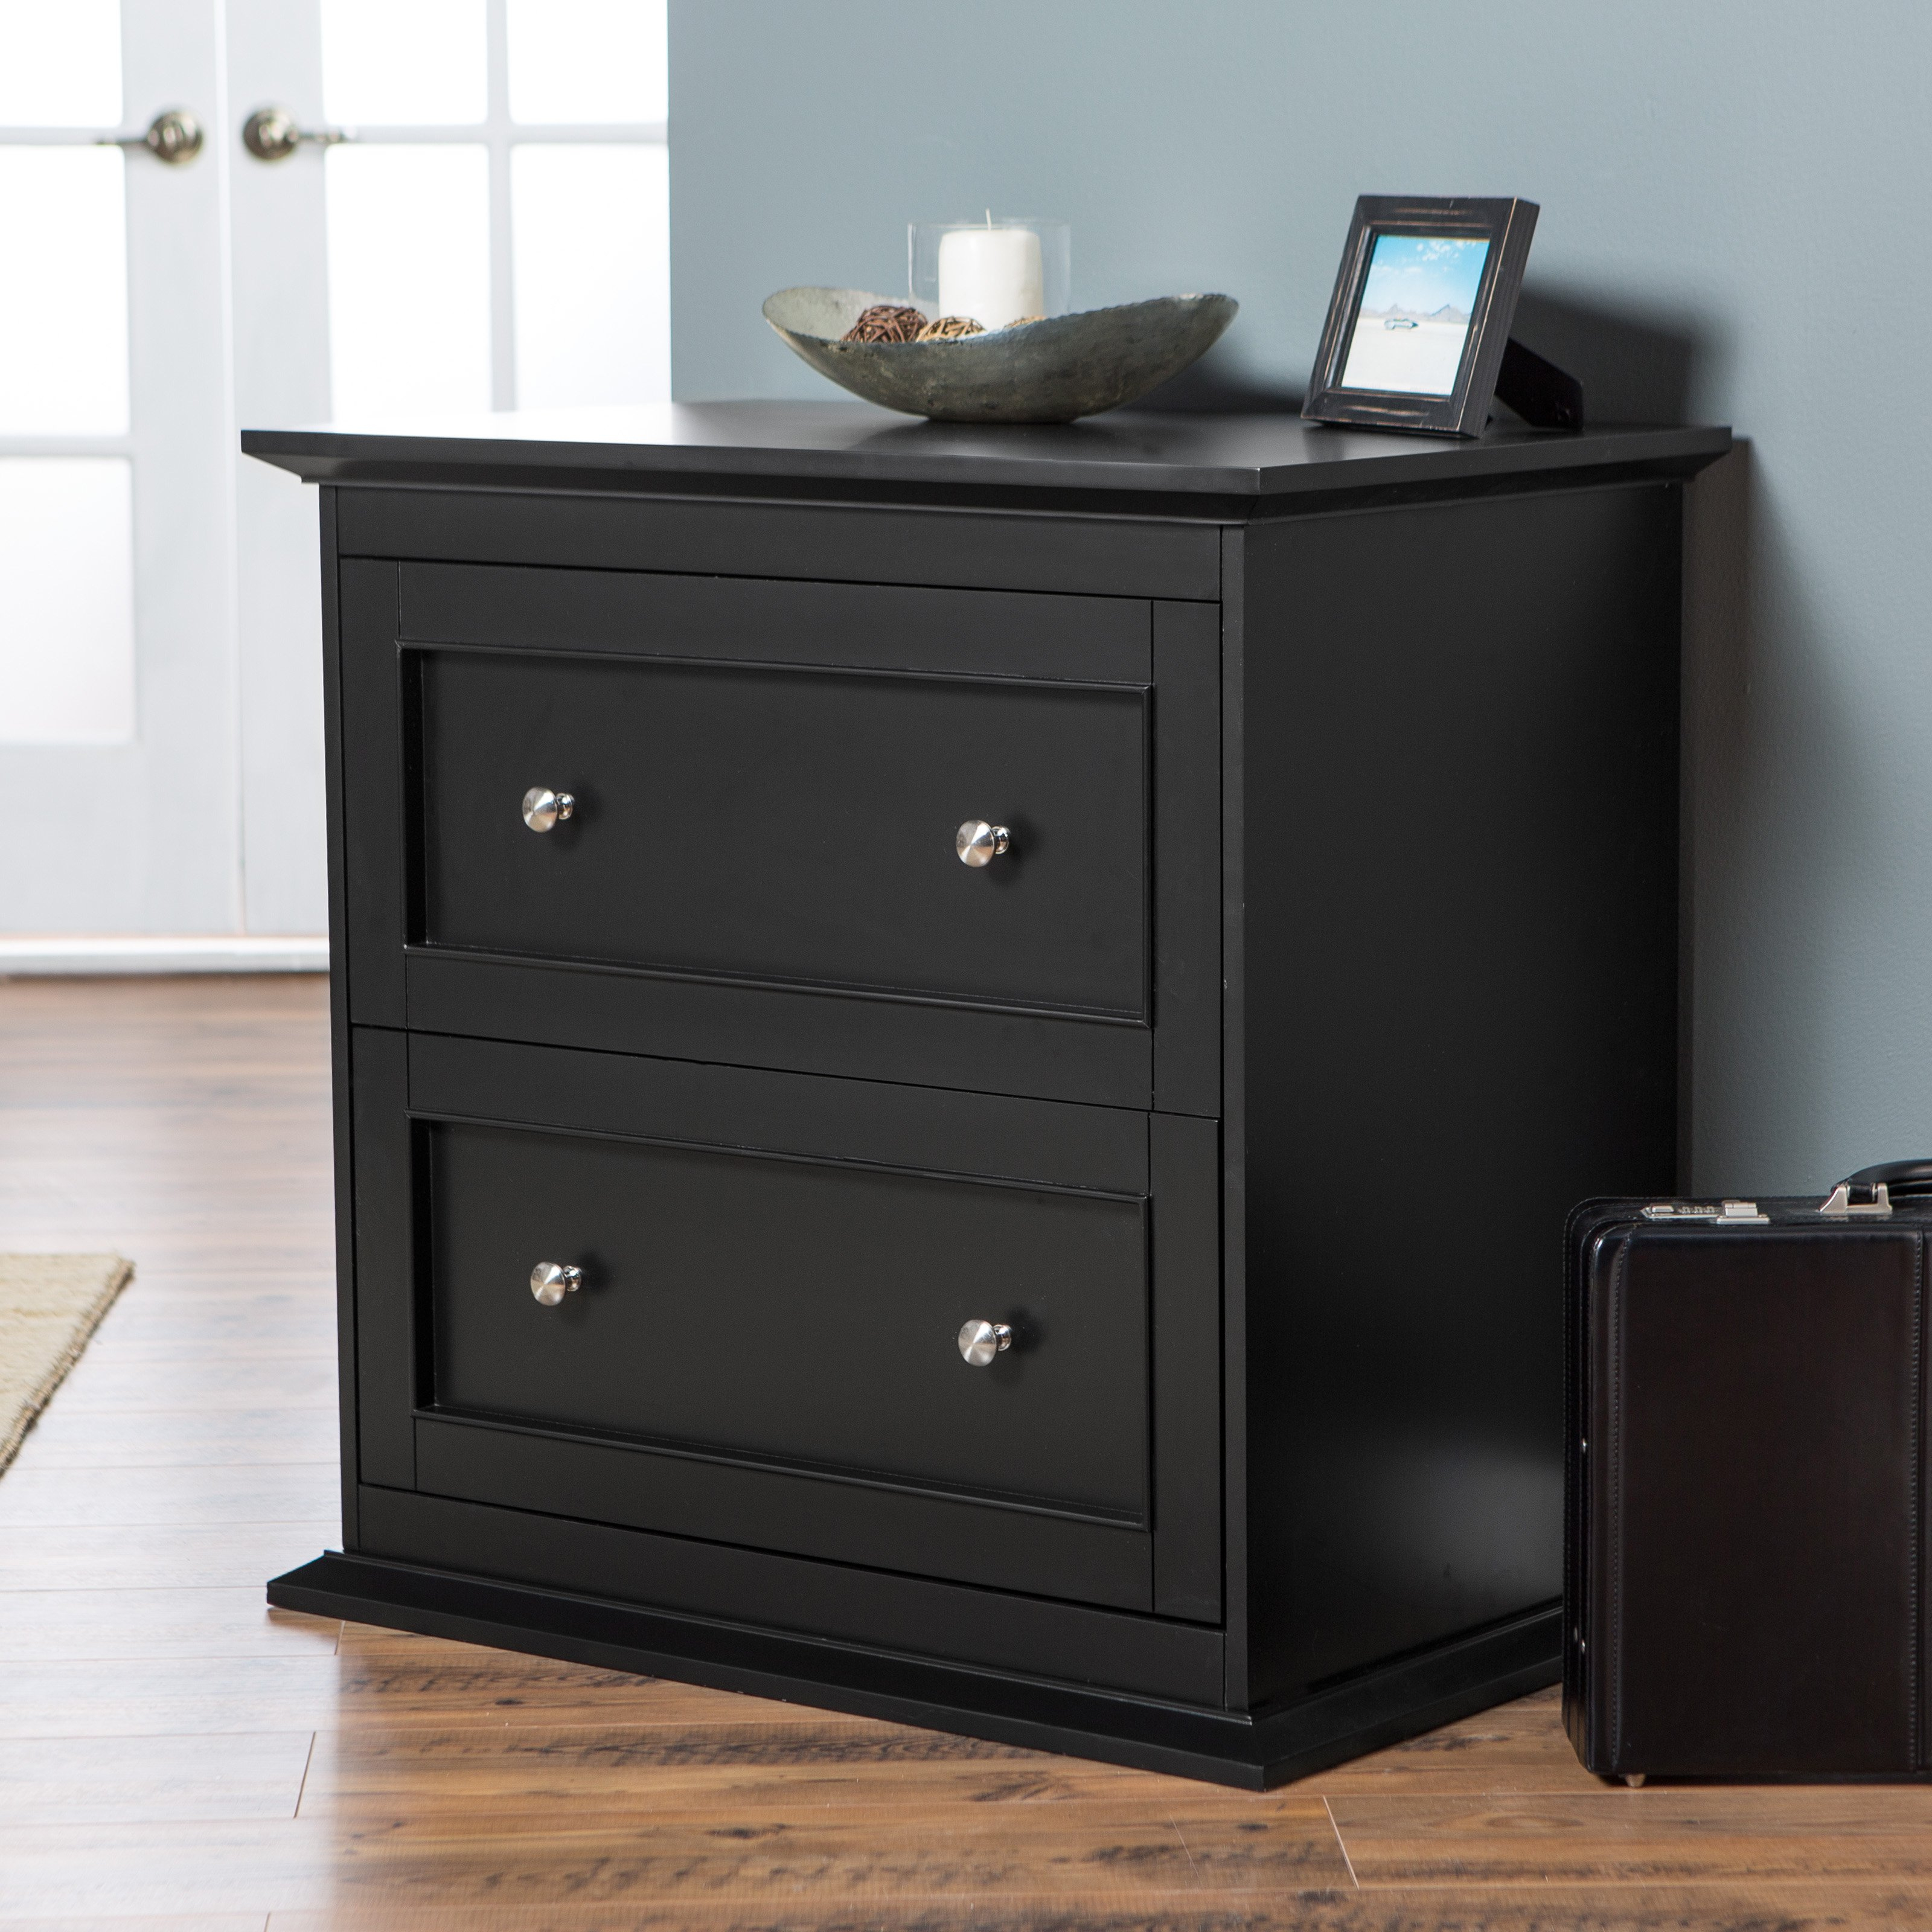 Belham Living Hampton 2 Drawer Lateral Wood Filing Cabinet Black within proportions 3200 X 3200